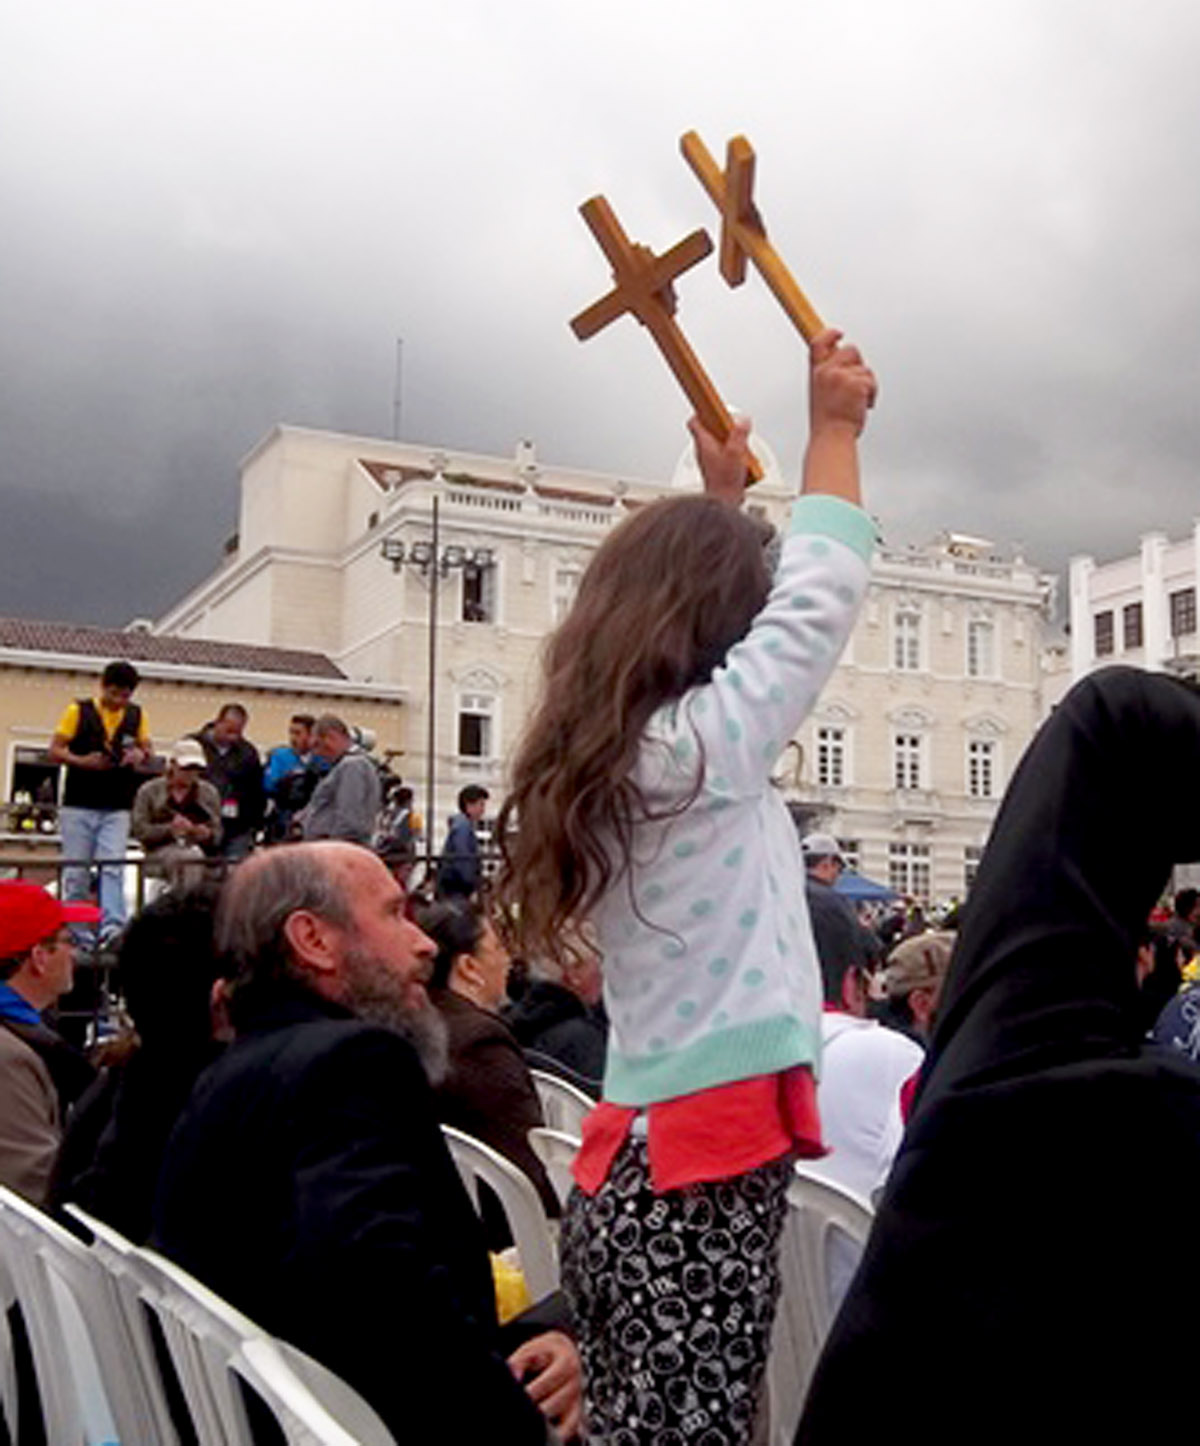 A young girl raises a pair of crosses while seeing Pope Francis from a distance. Photo credit: Sondra Holden